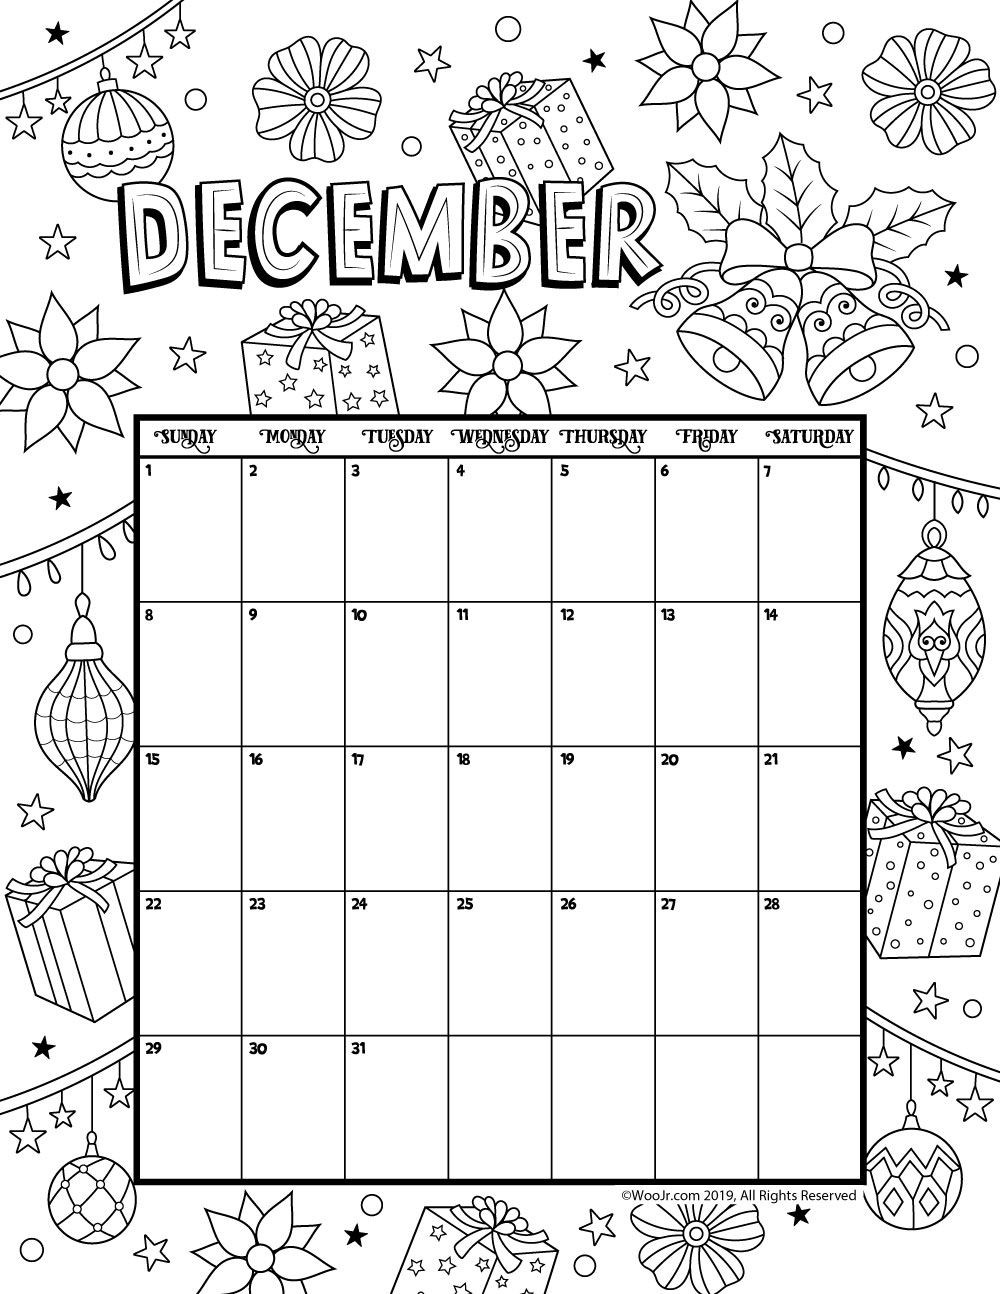 December Calendar 2021 Coloring Pages - Calendar For 2021 Coloring Pages - Coloring Pages For-December 2021 Calendar Printable On 8X10